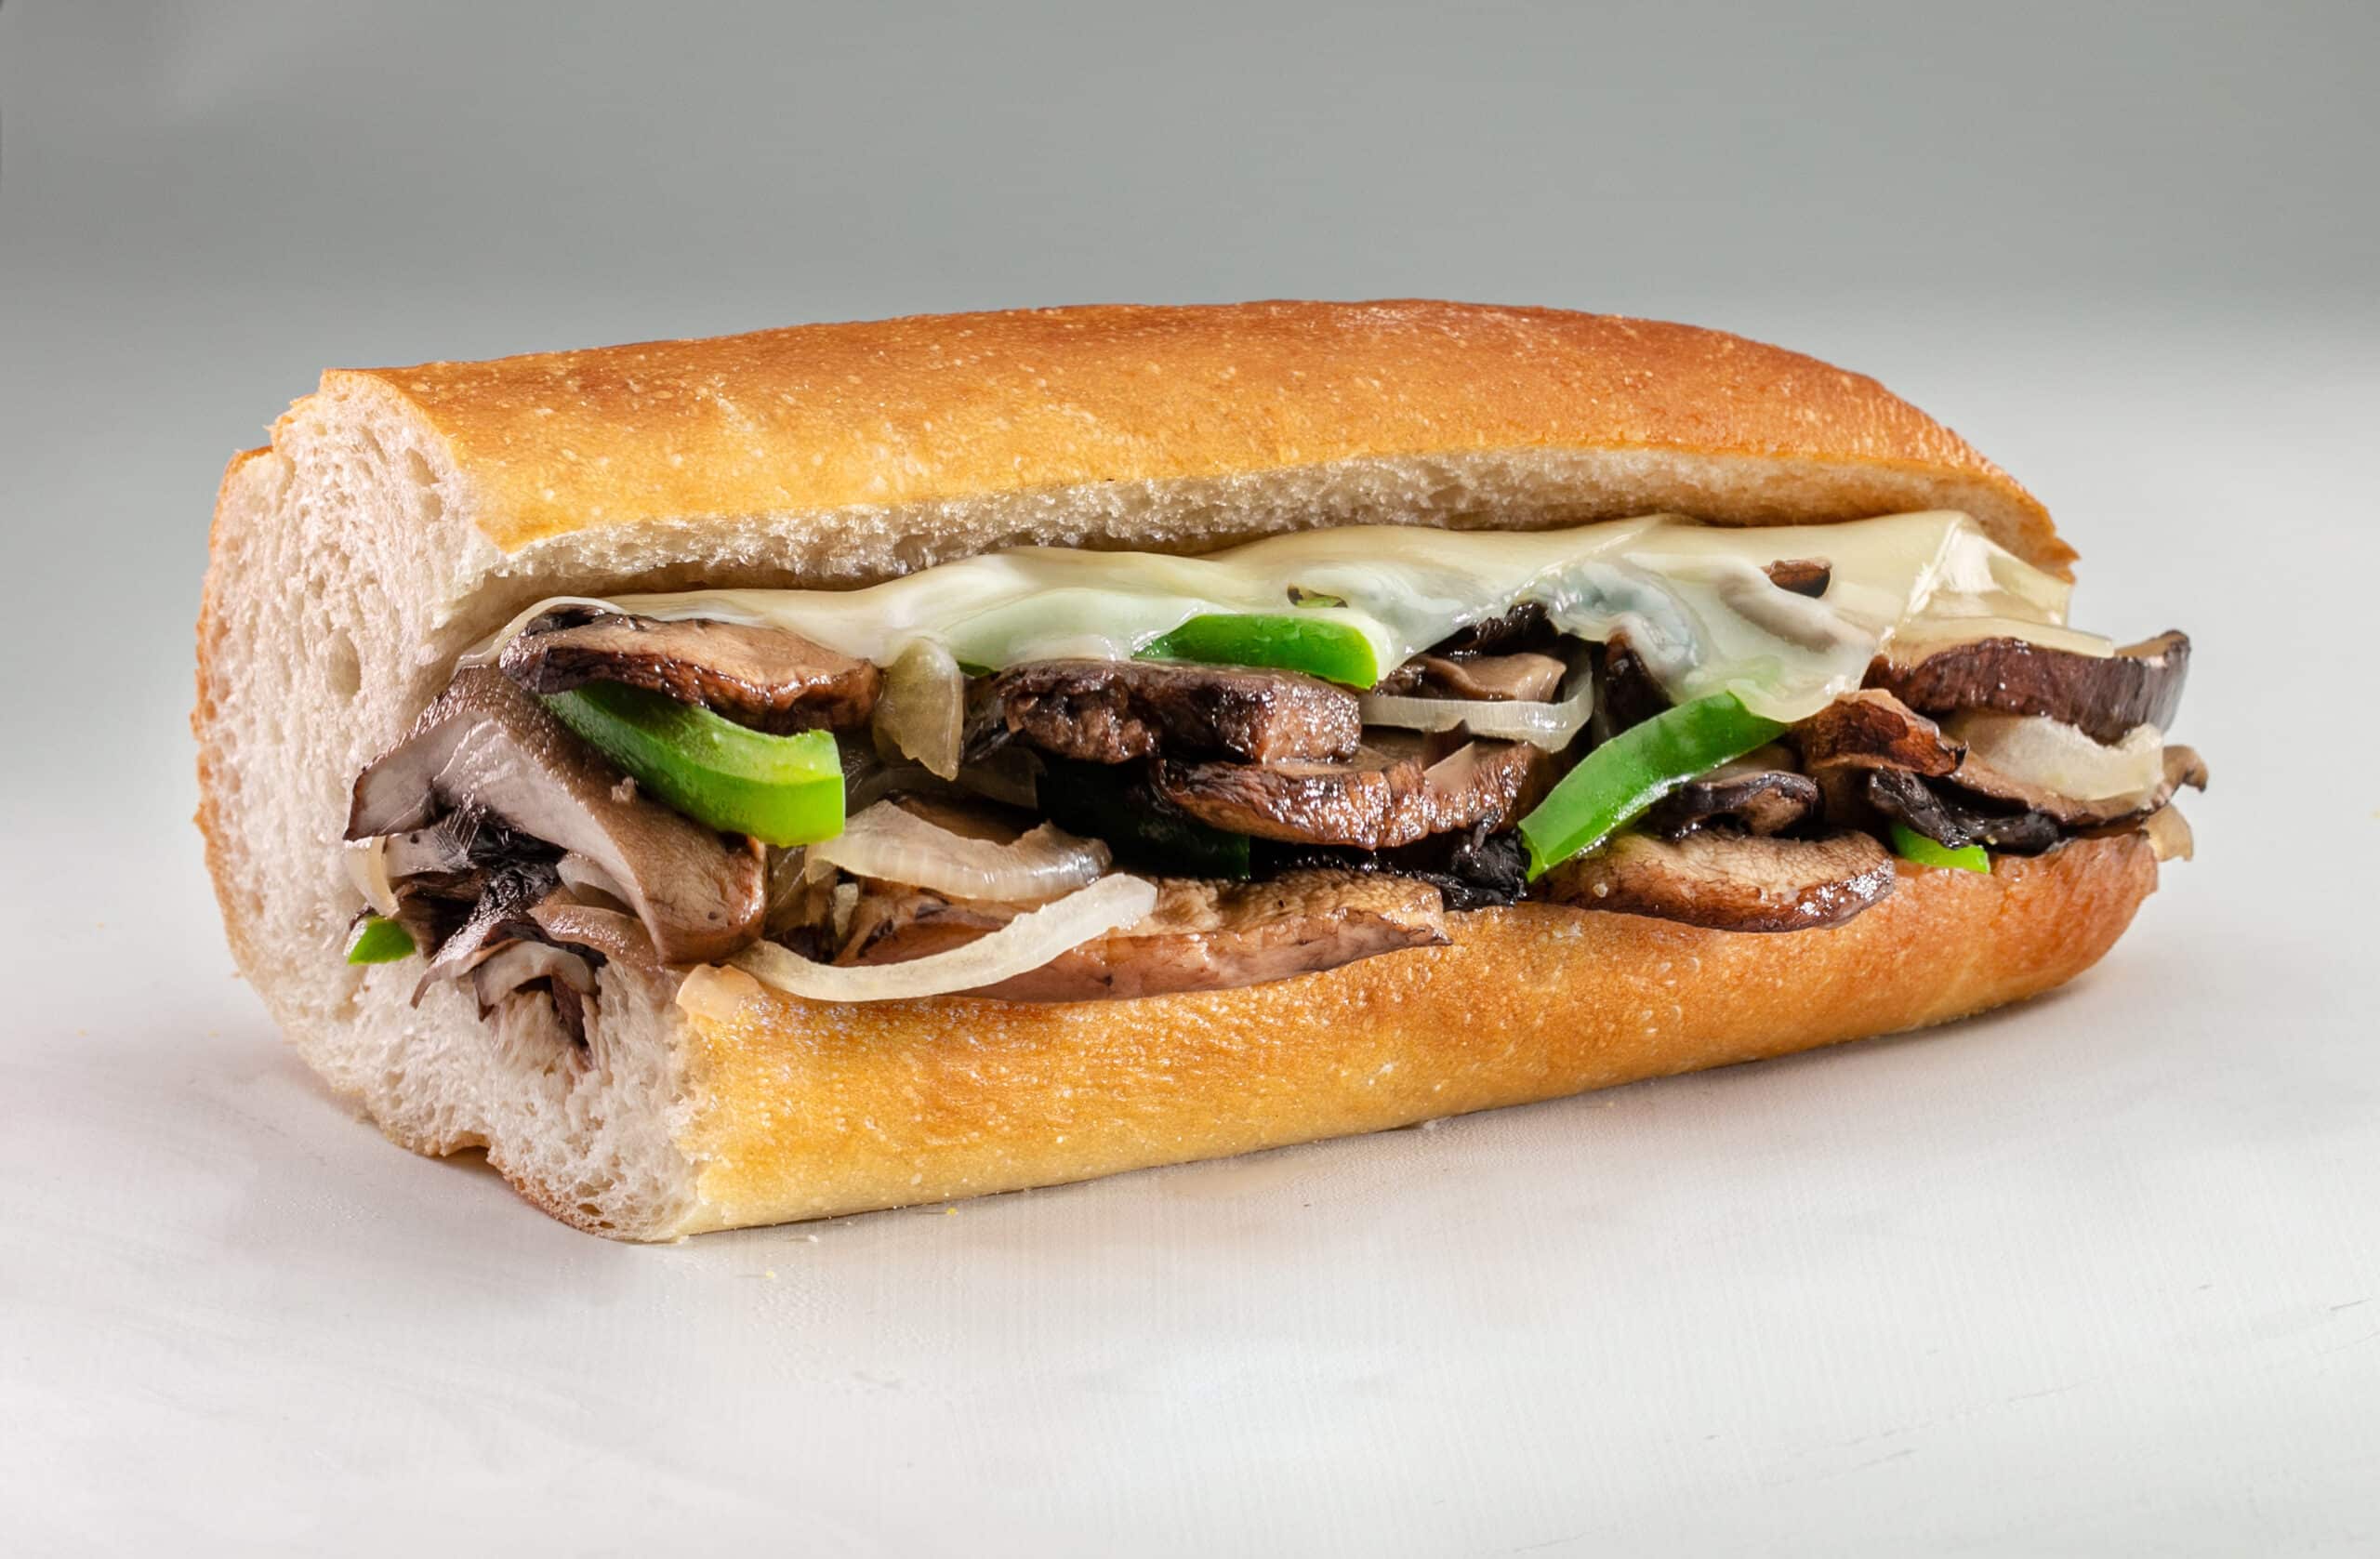 Jersey Mike’s Subs Grilled Portabella Mushroom And Swiss Sub